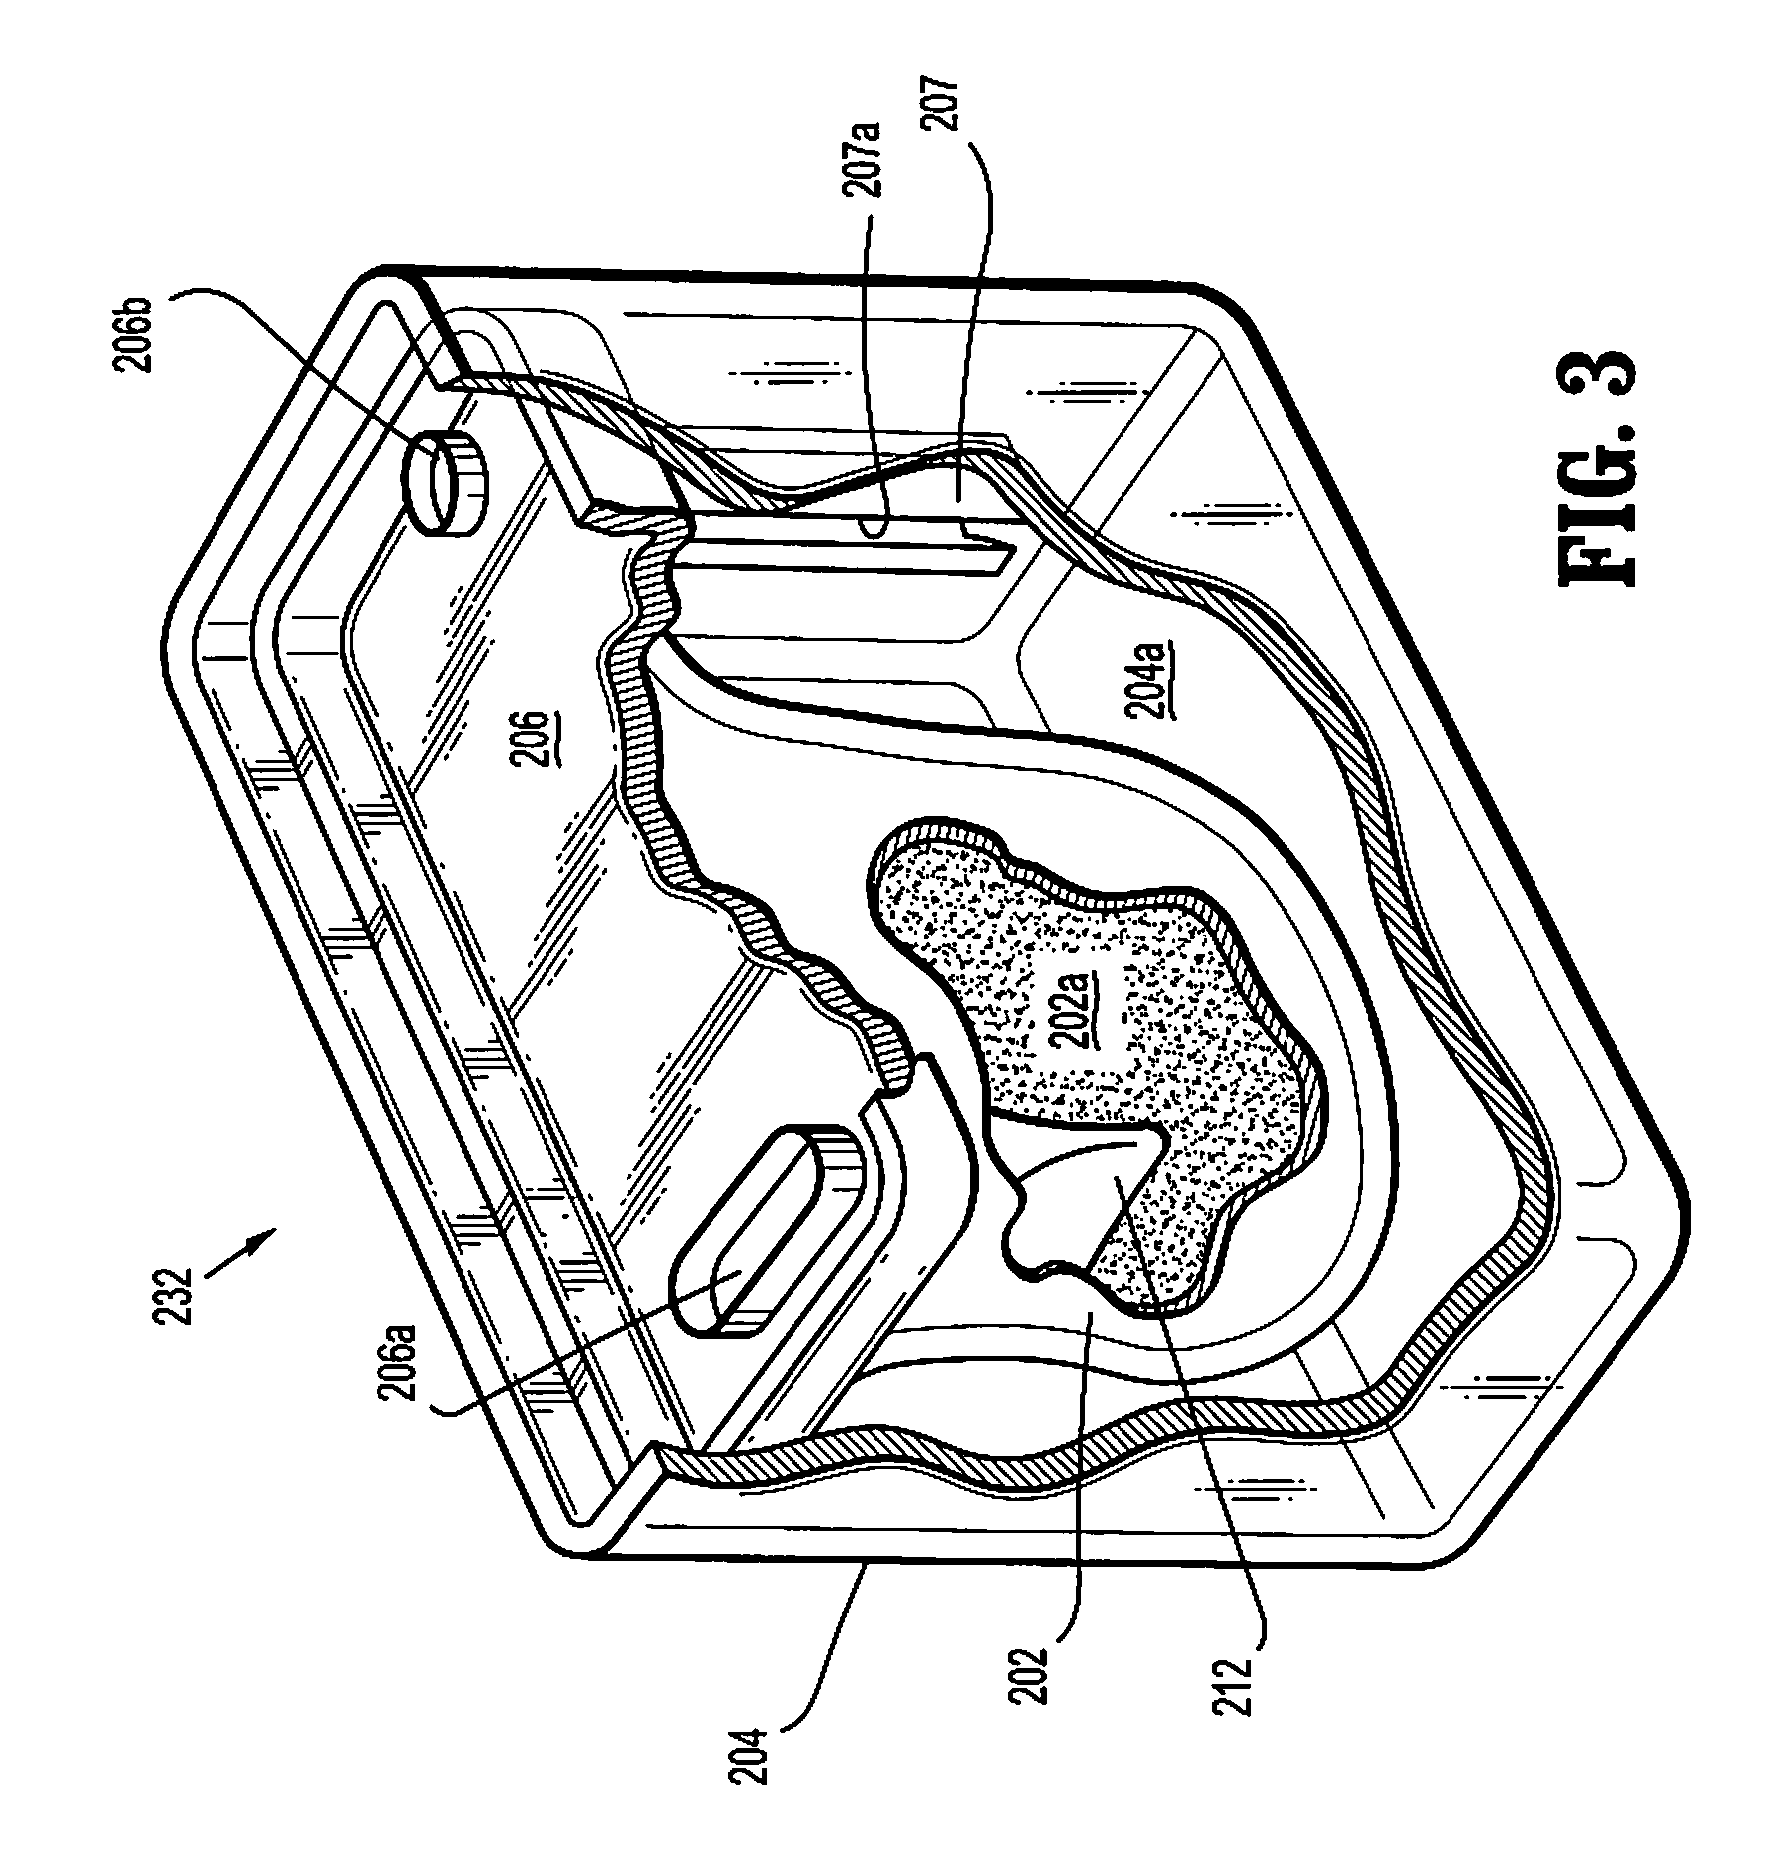 Wound therapy system with portable container apparatus